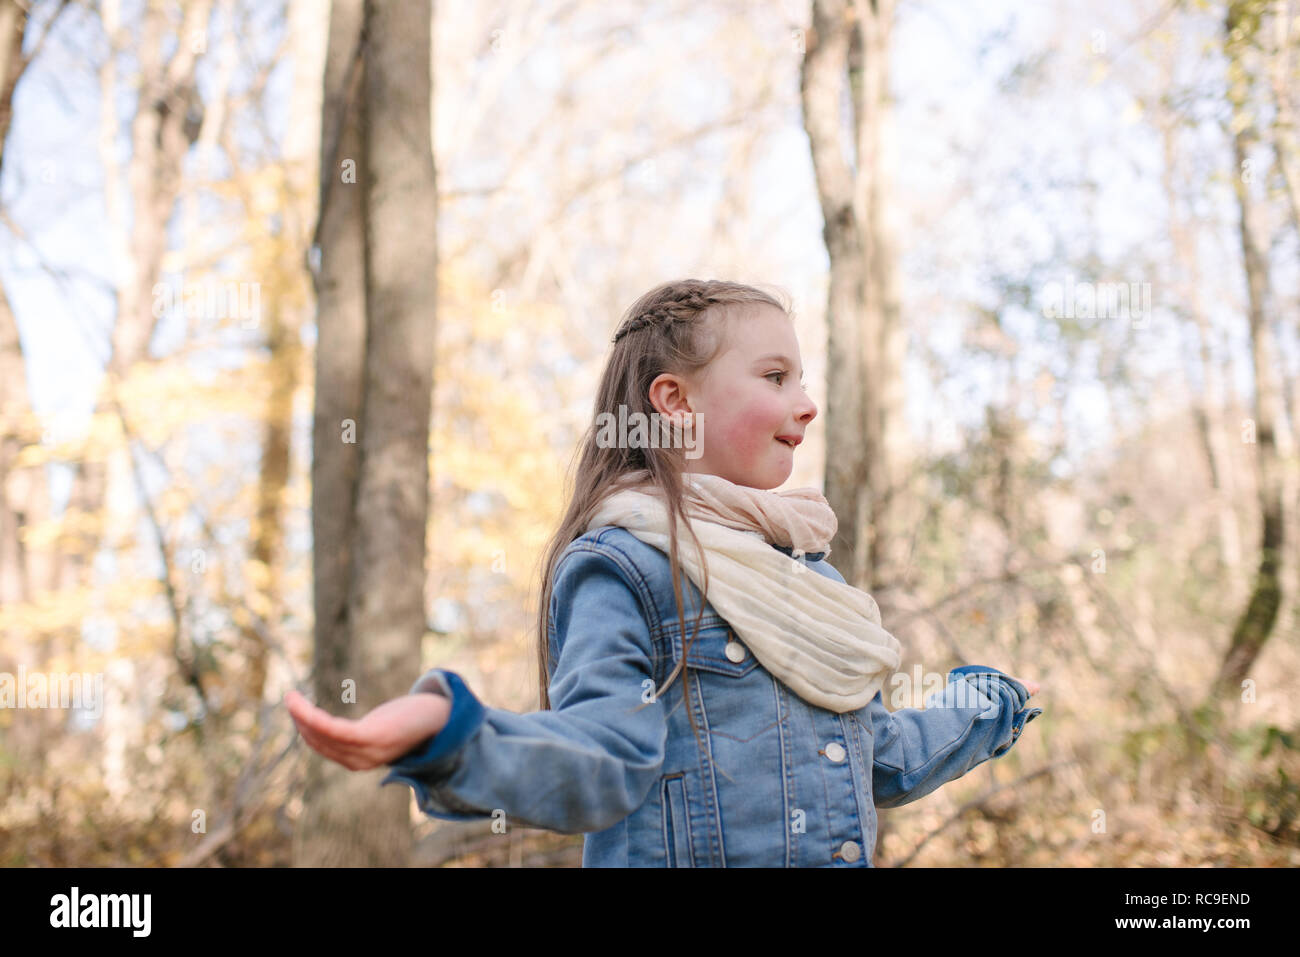 Little girl holding out hands in forest Stock Photo